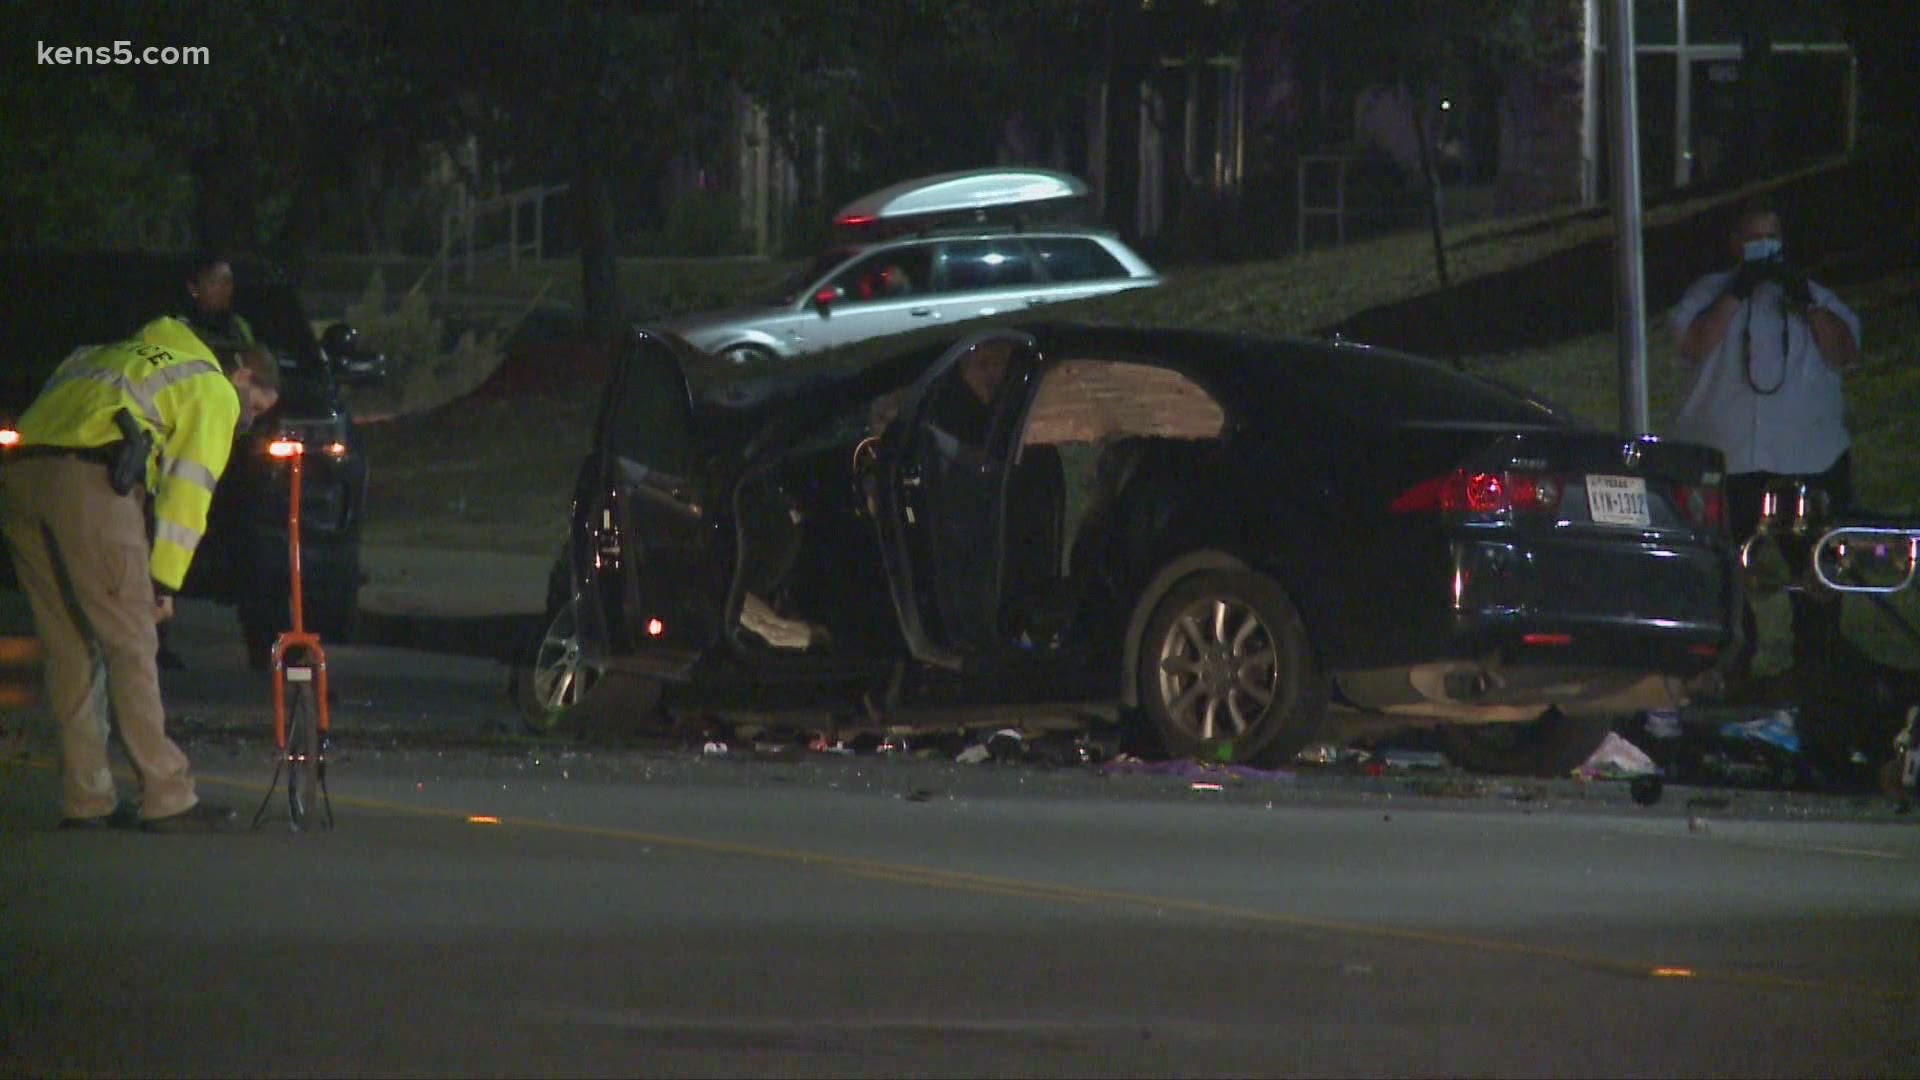 Witnesses told police a male driver was speeding around 80 to 90 mph eastbound on De Zavala Road.